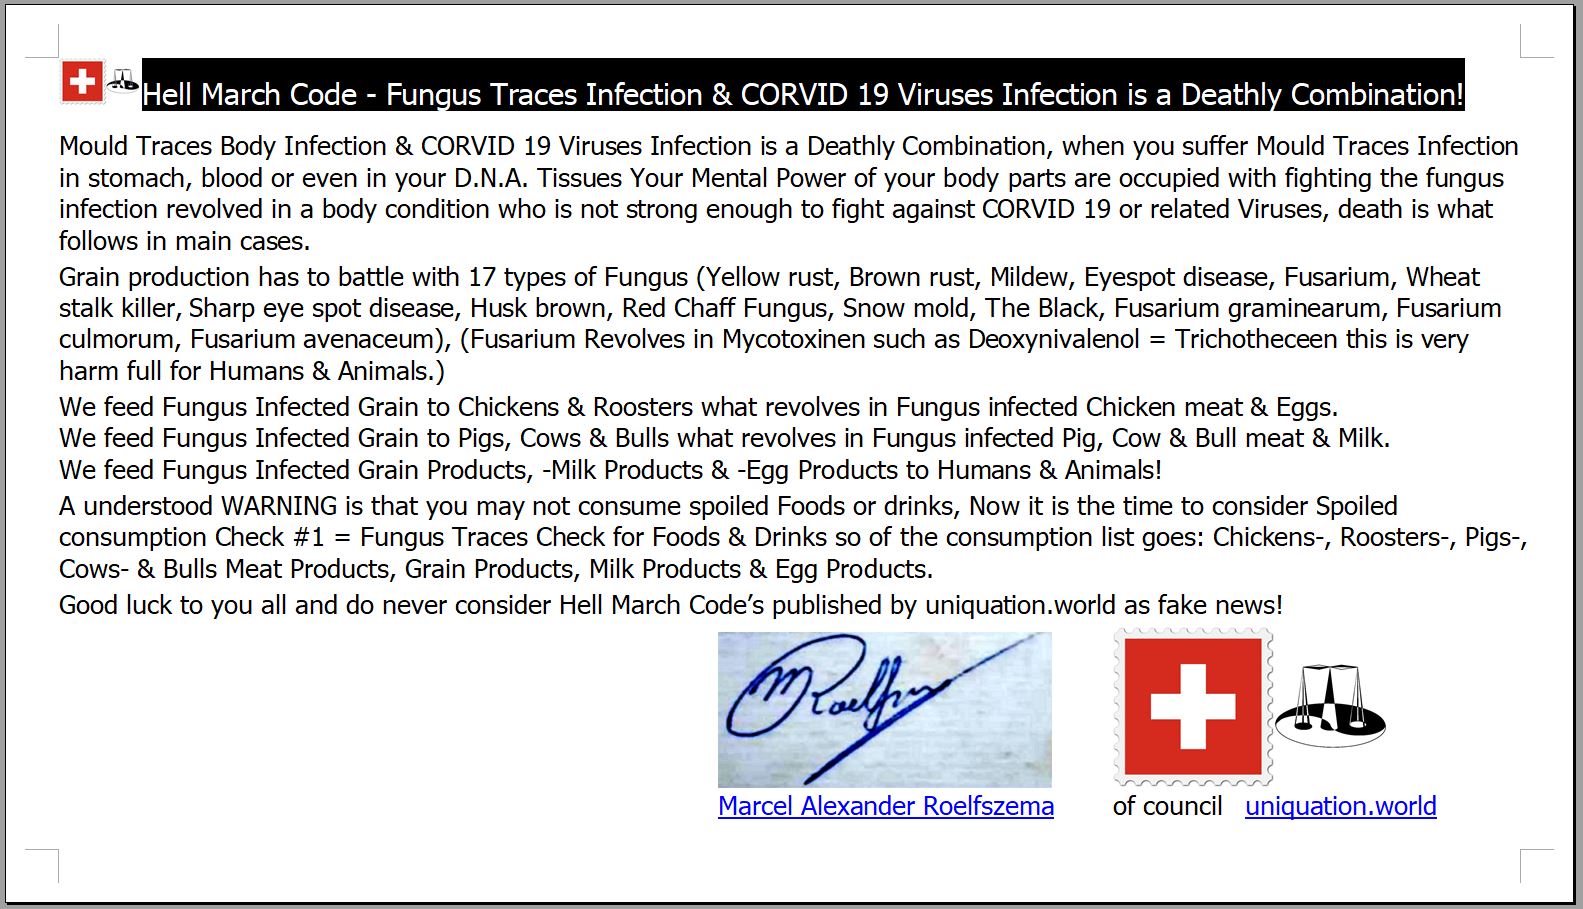 Hell March Code - Fungus Traces Infection & CORVID 19 Viruses Infection is a Deathly Combination